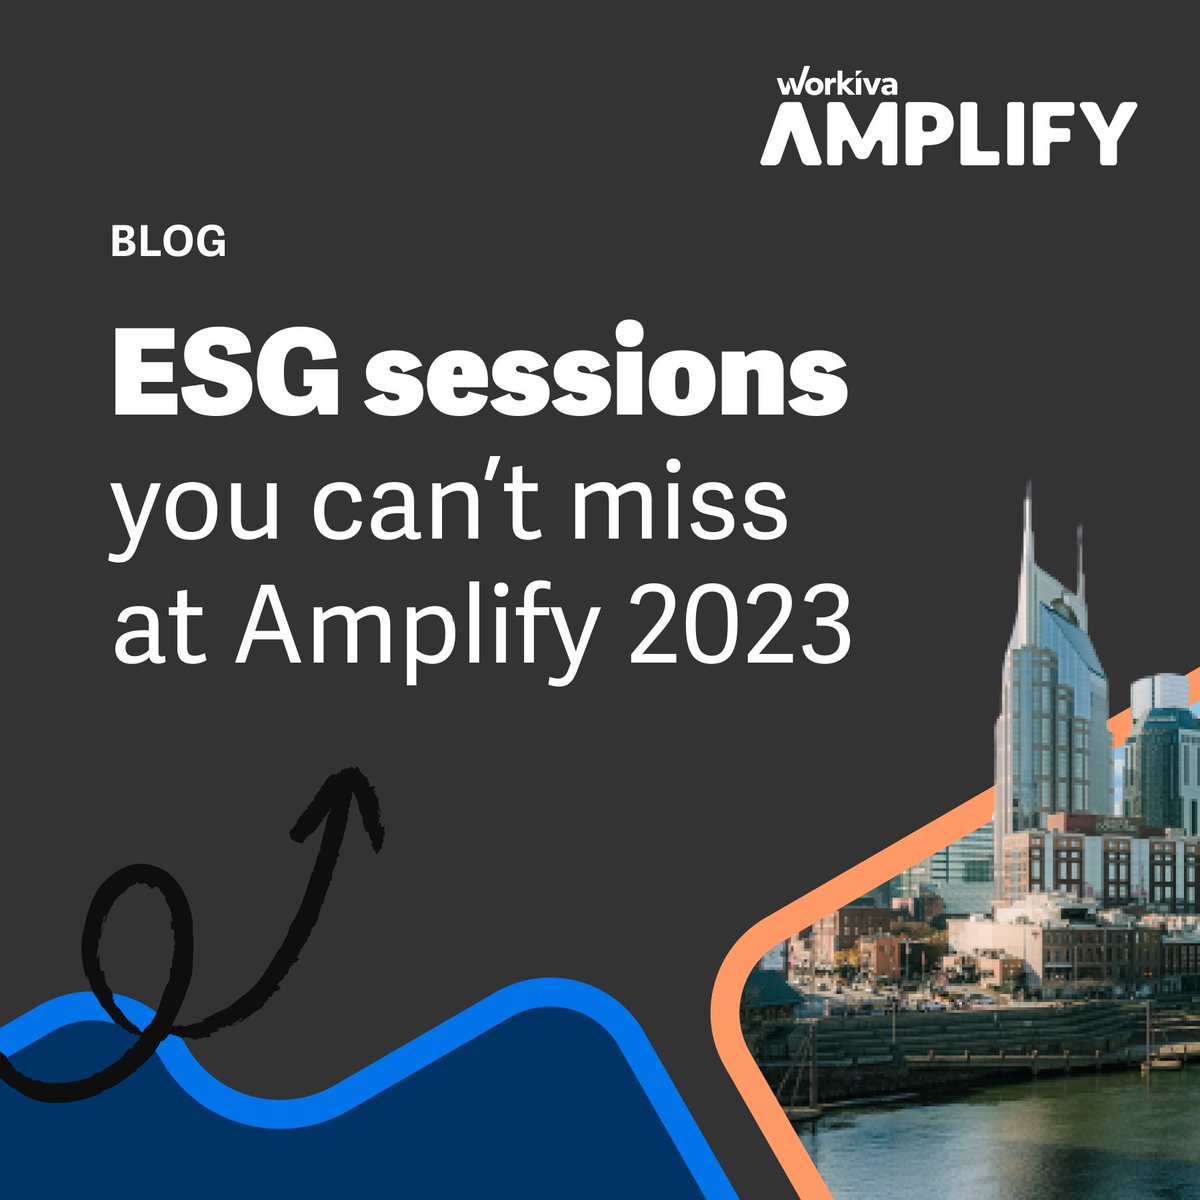 Not sure which #WorkivaAmplify 2023 #ESG sessions to attend? Make sure to add these five to your list!  Learn more here: sm.workiva.com/3QIj0nJ #ESGreporting #Sustainability